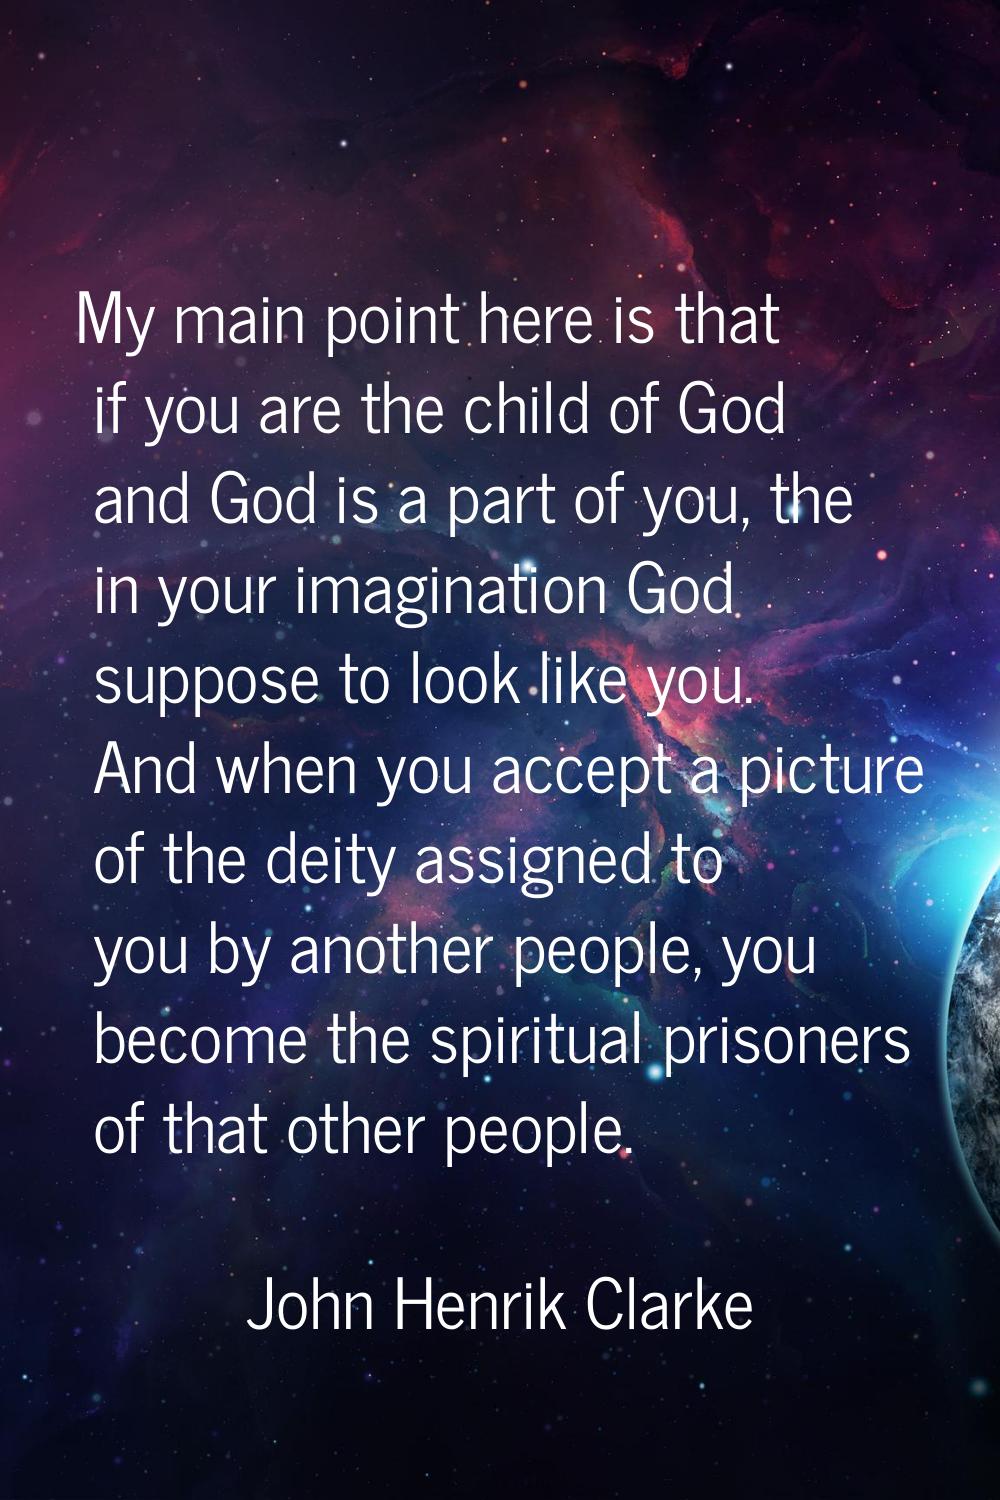 My main point here is that if you are the child of God and God is a part of you, the in your imagin